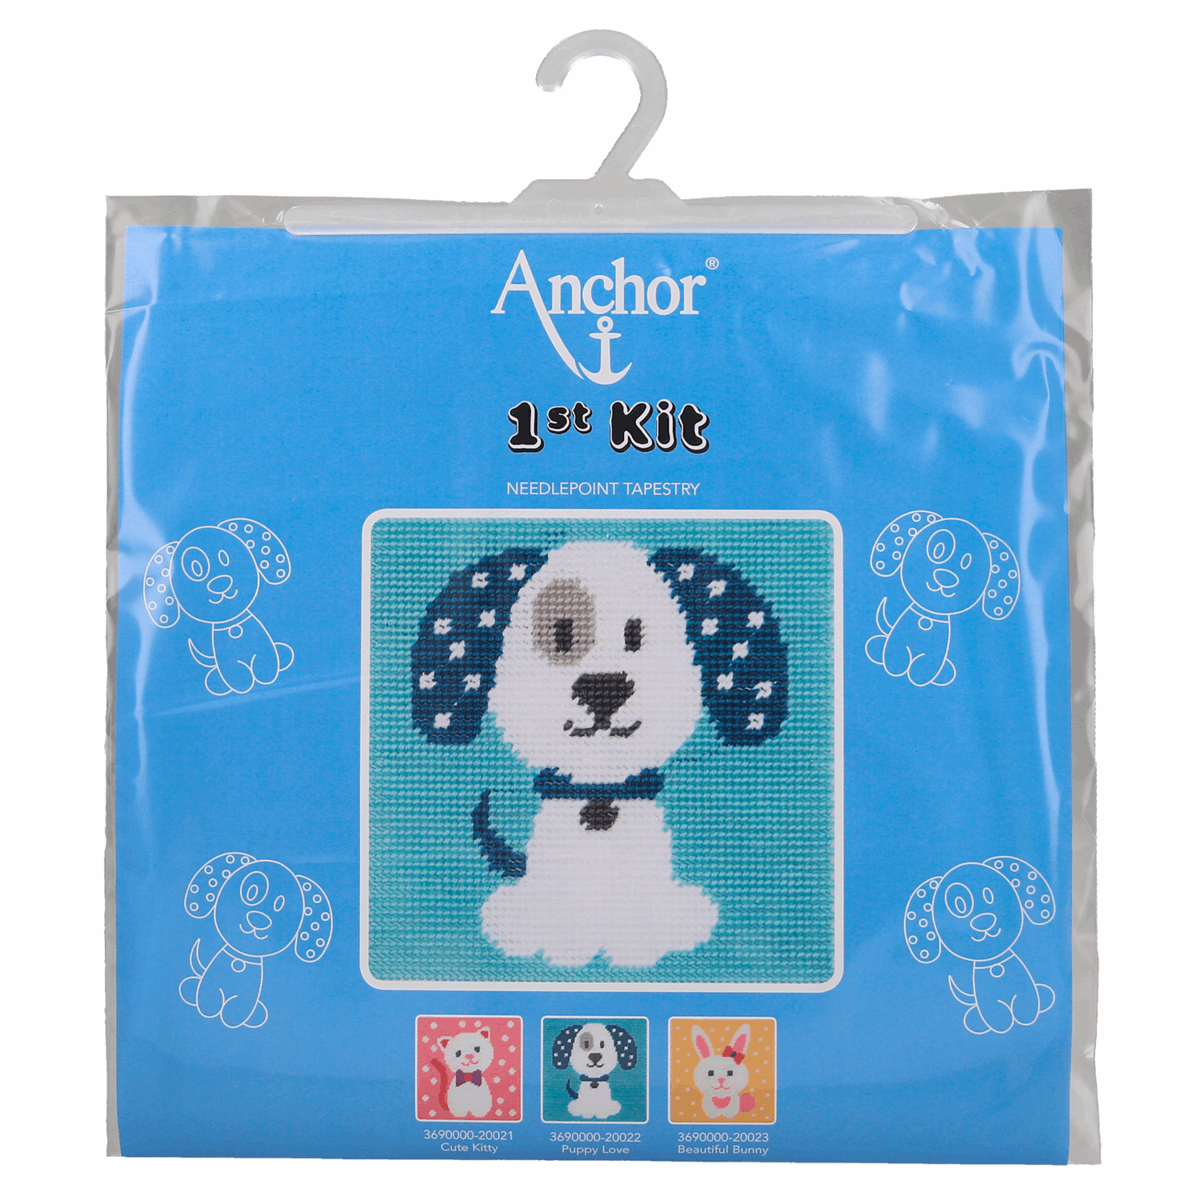 Anchor My 1st Tapestry Kit - Puppy Love